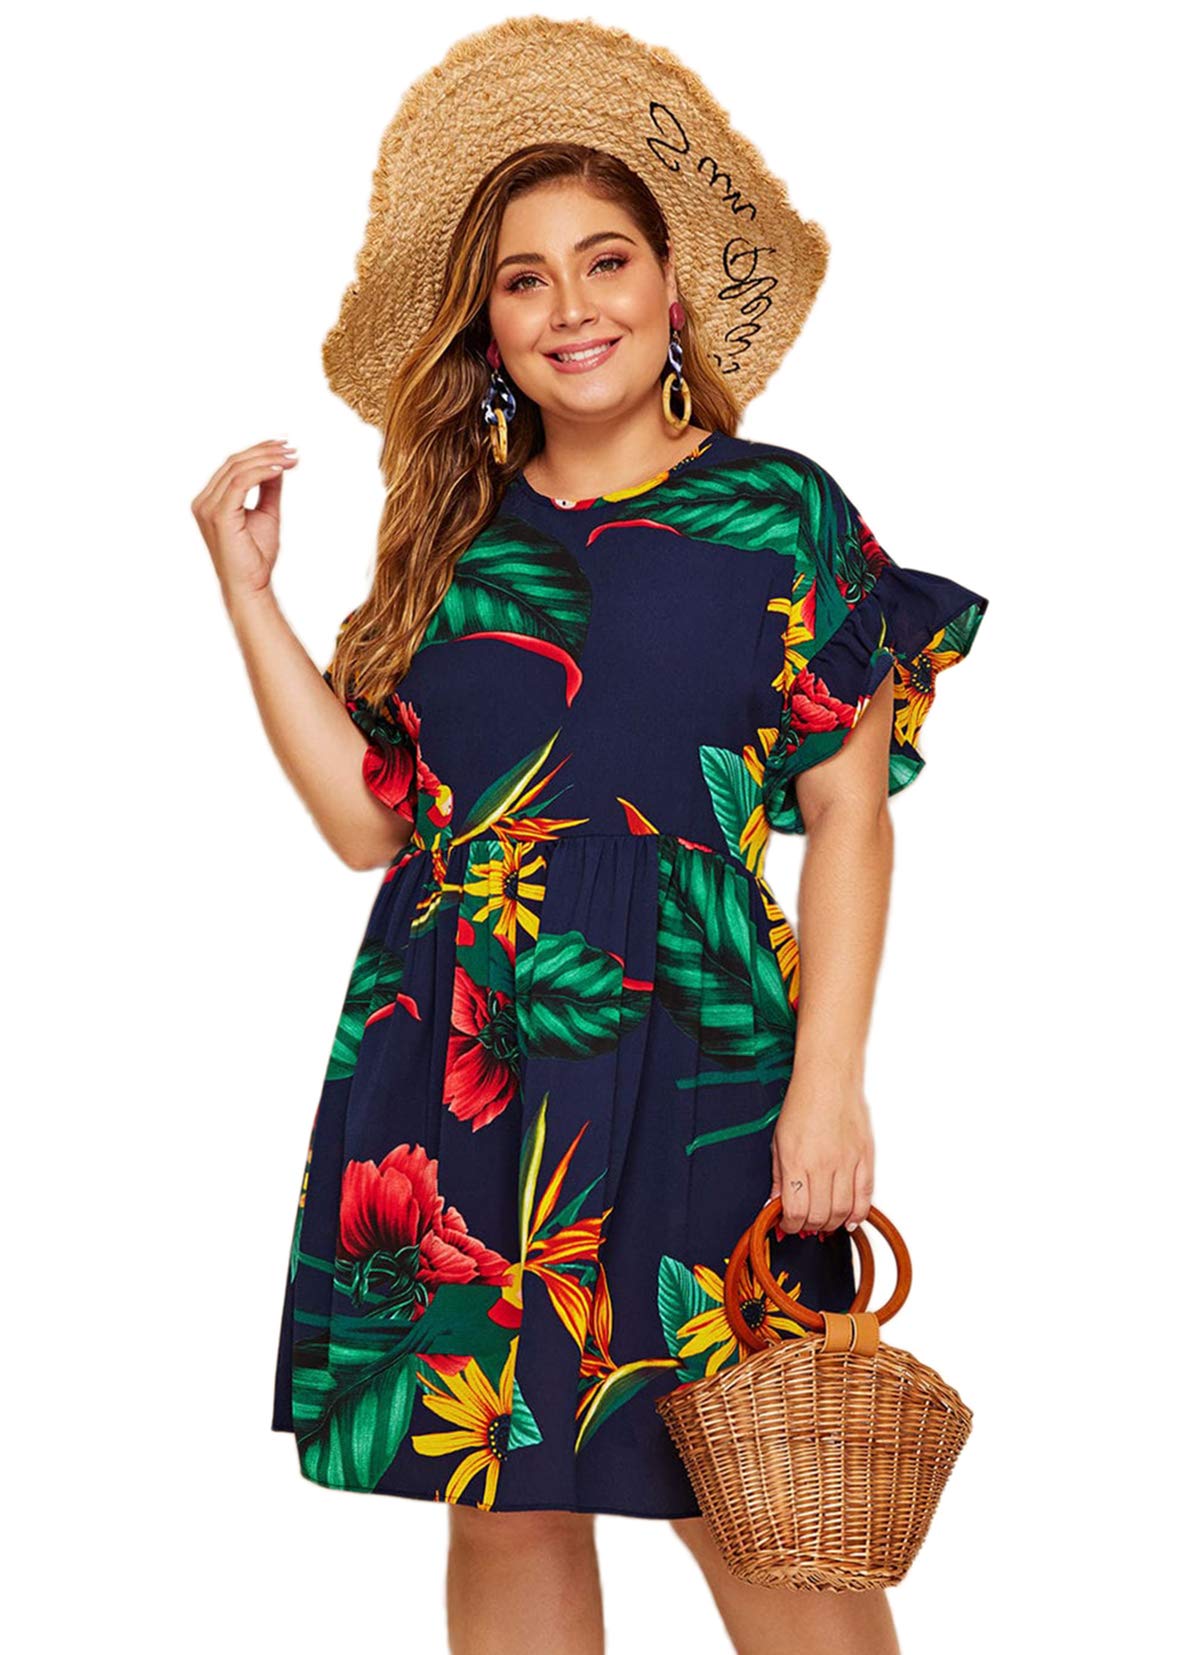 Buy > plus size tropical outfit > in stock